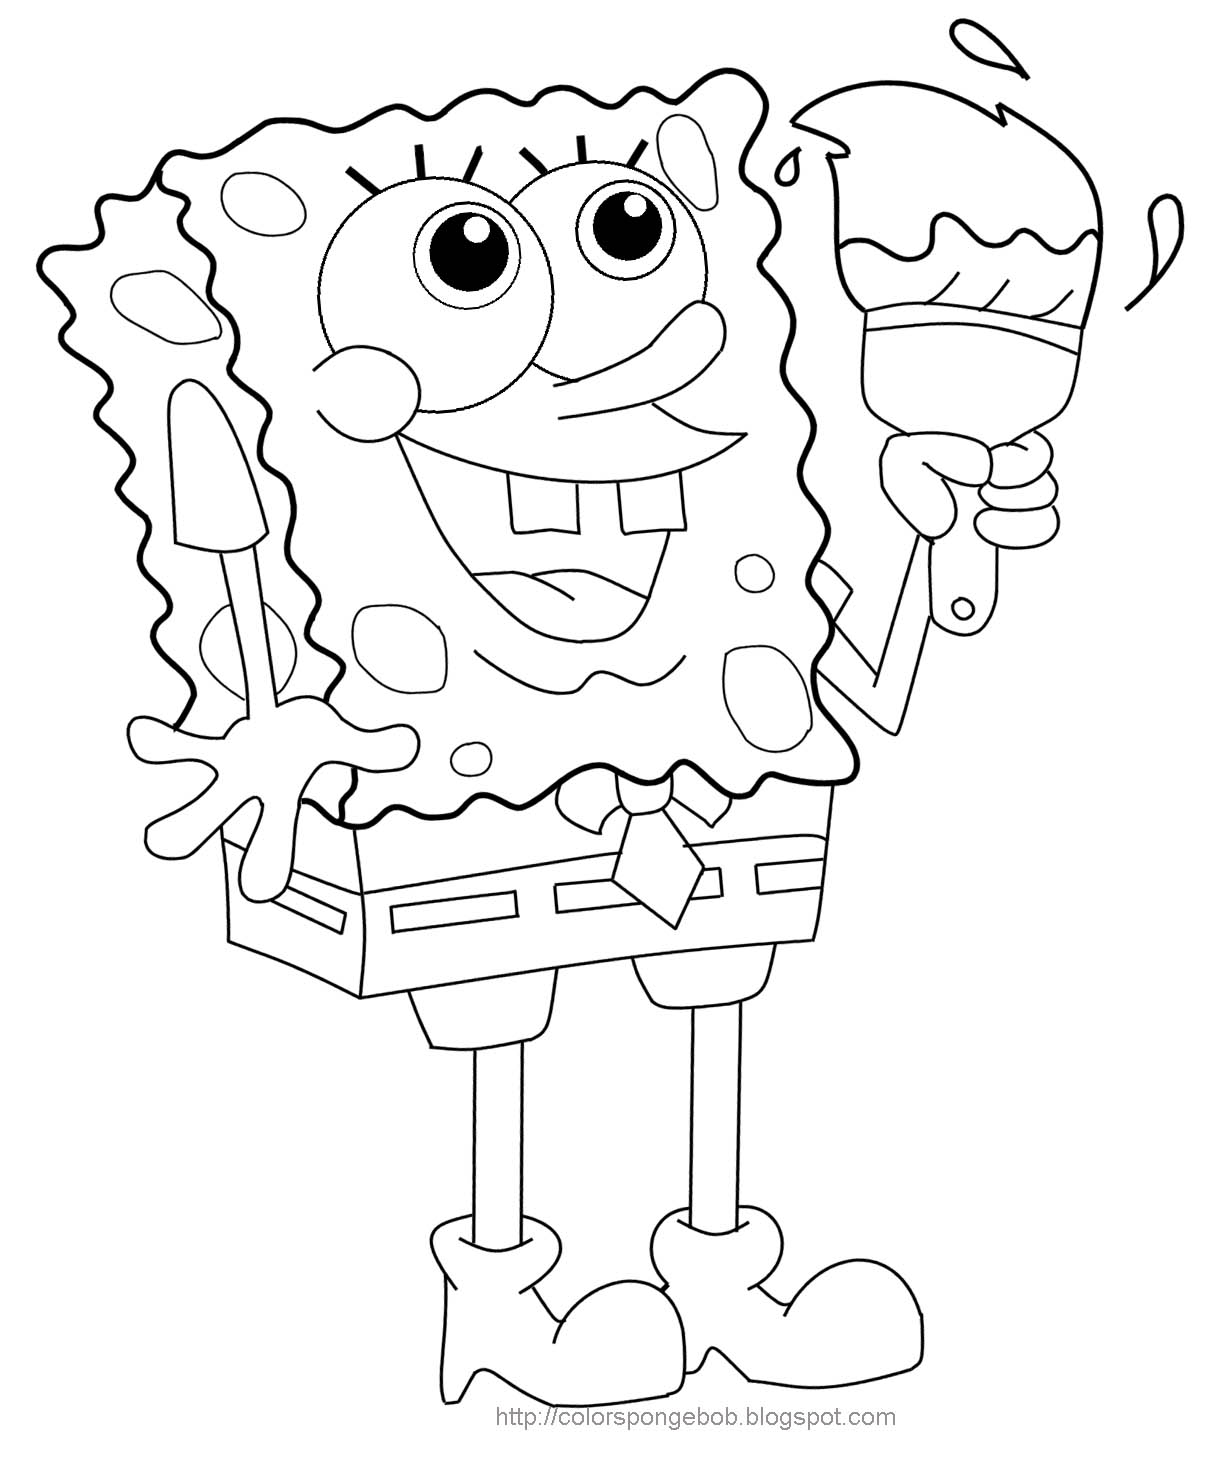 a coloring pages of spongebob - photo #26